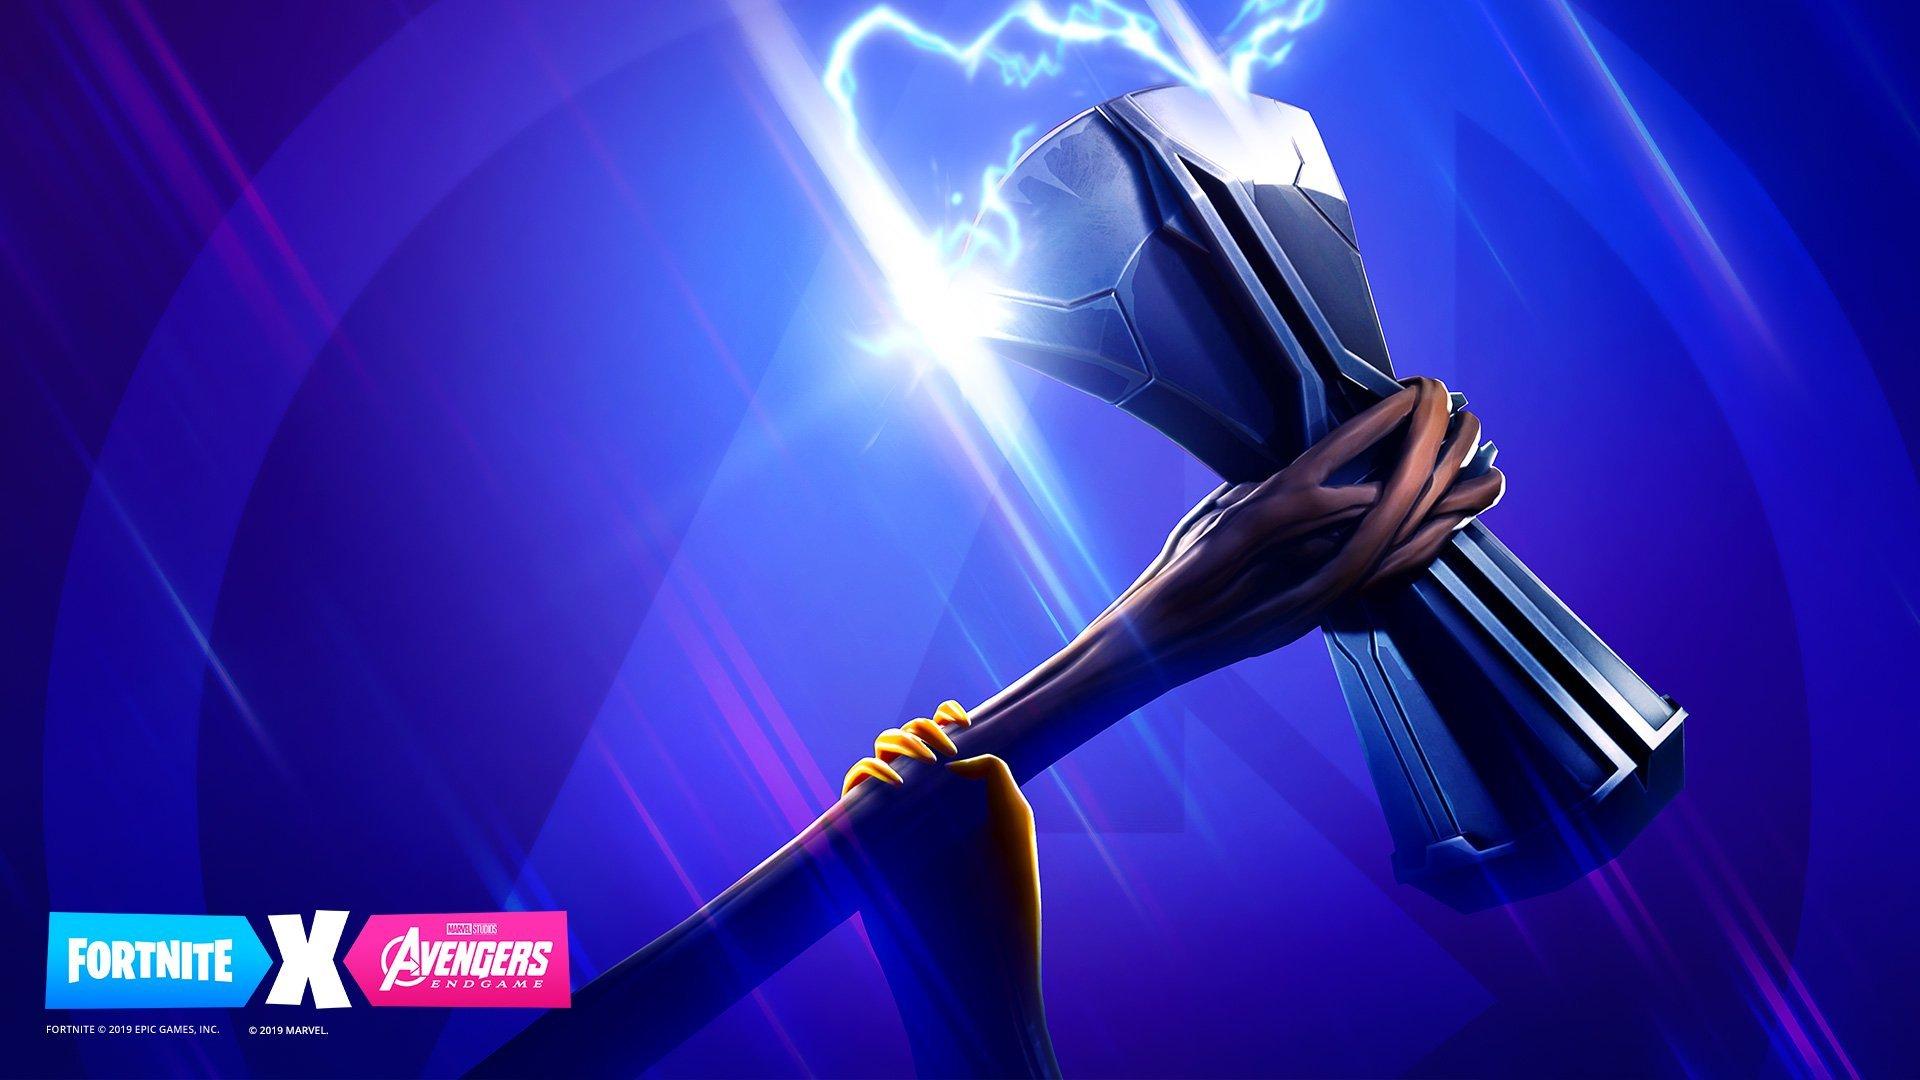 New Fortnite Teasers For Avengers: Endgame Event Feature